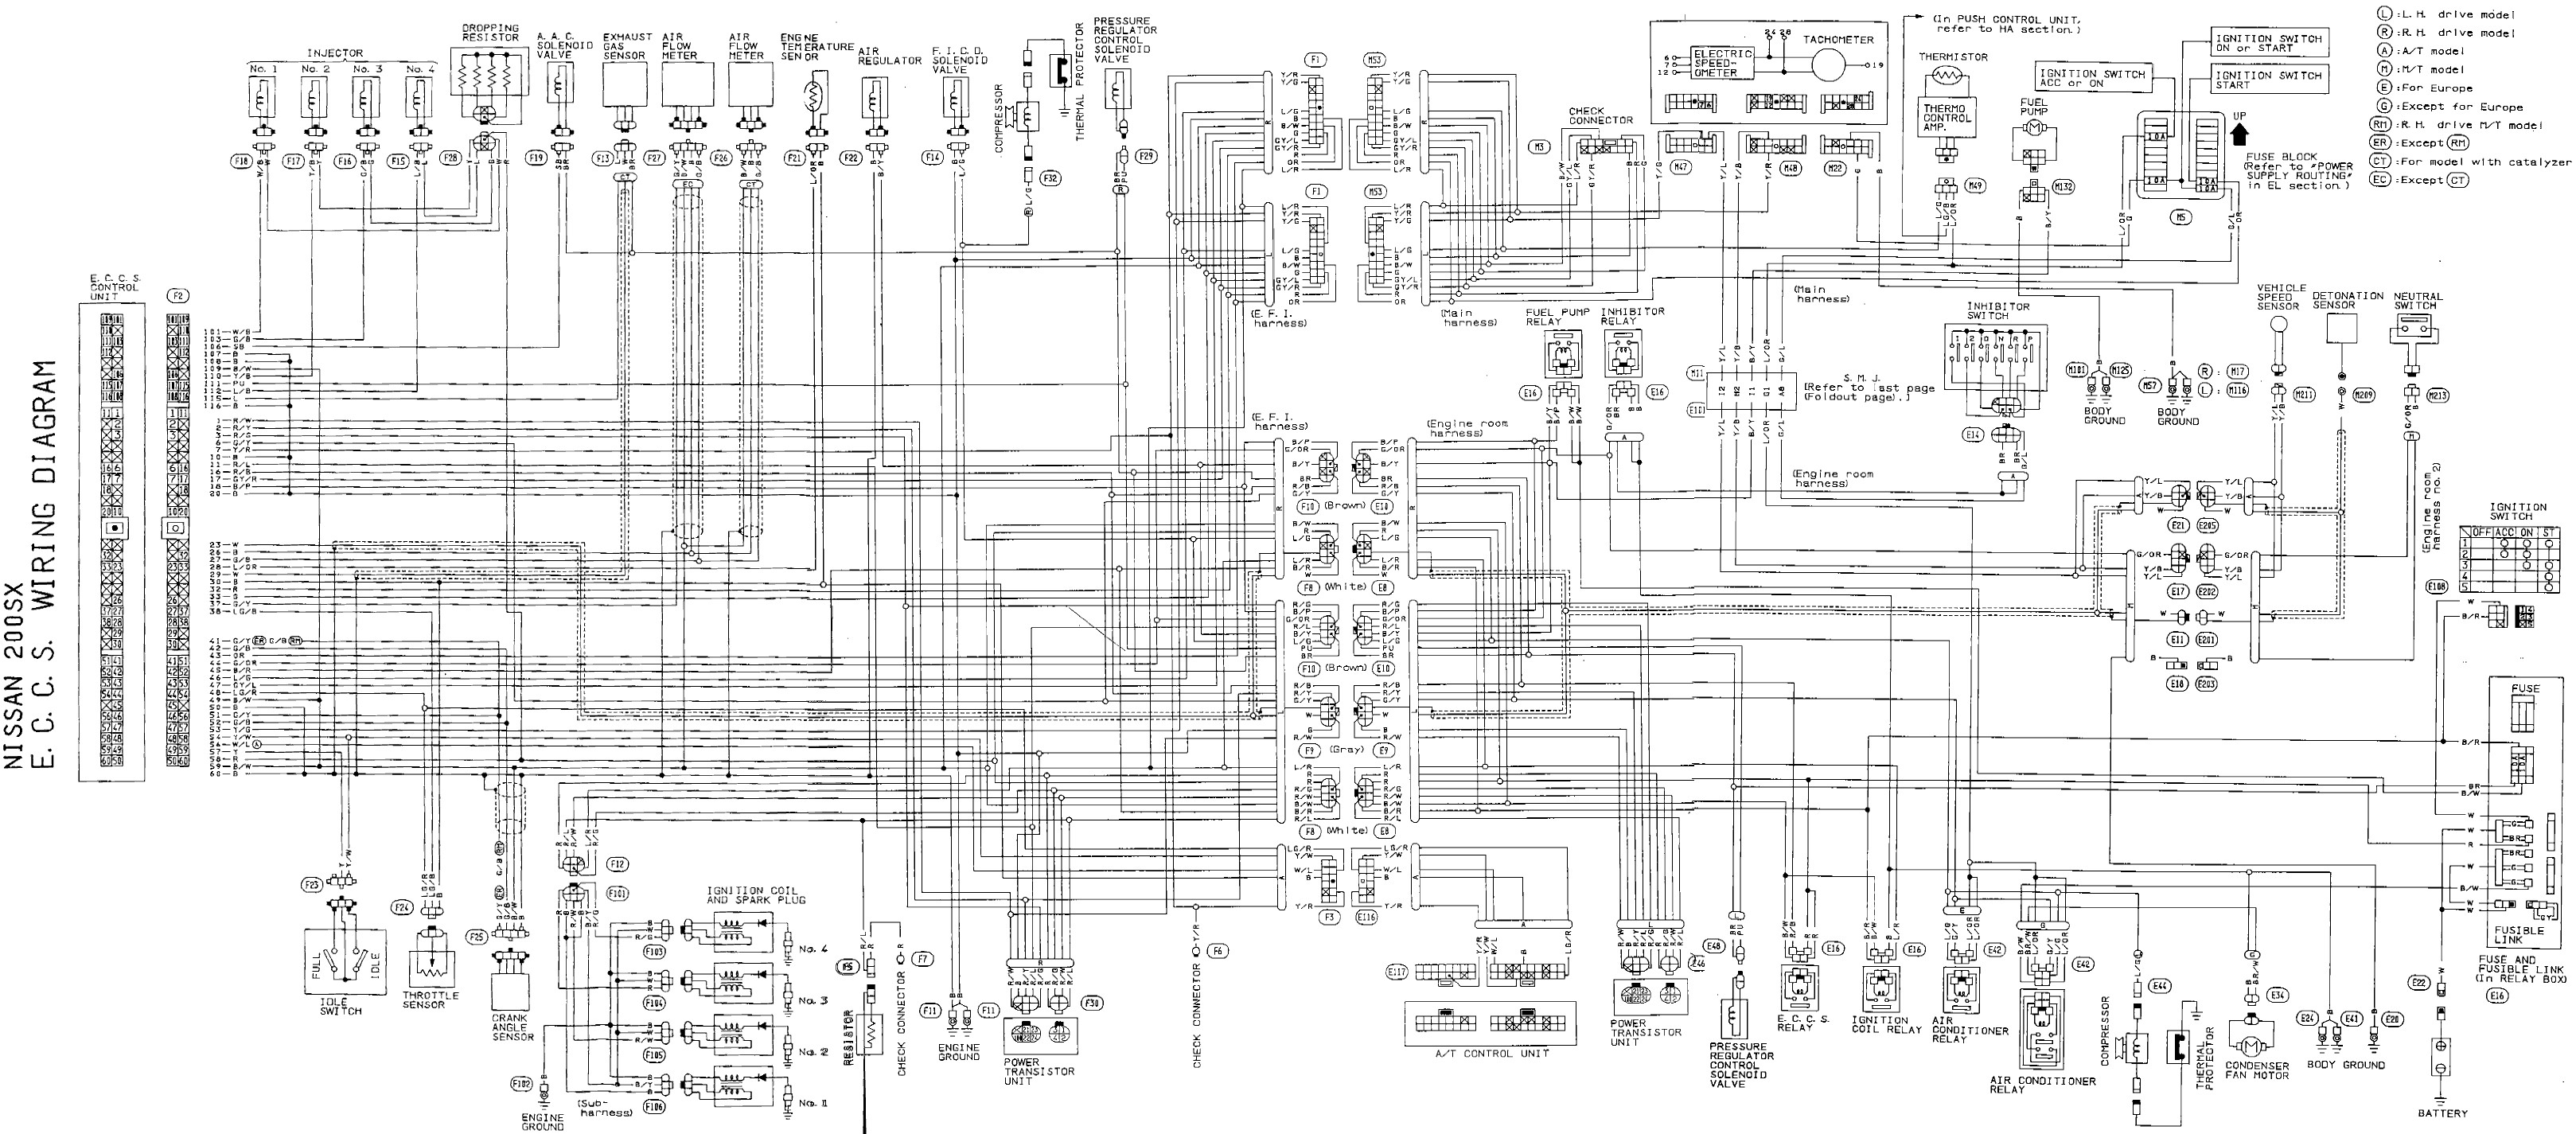 Nissan Sentra Engine Diagram 200sx Engine Wiring Harness Get Free Image About Wiring Diagram Of Nissan Sentra Engine Diagram